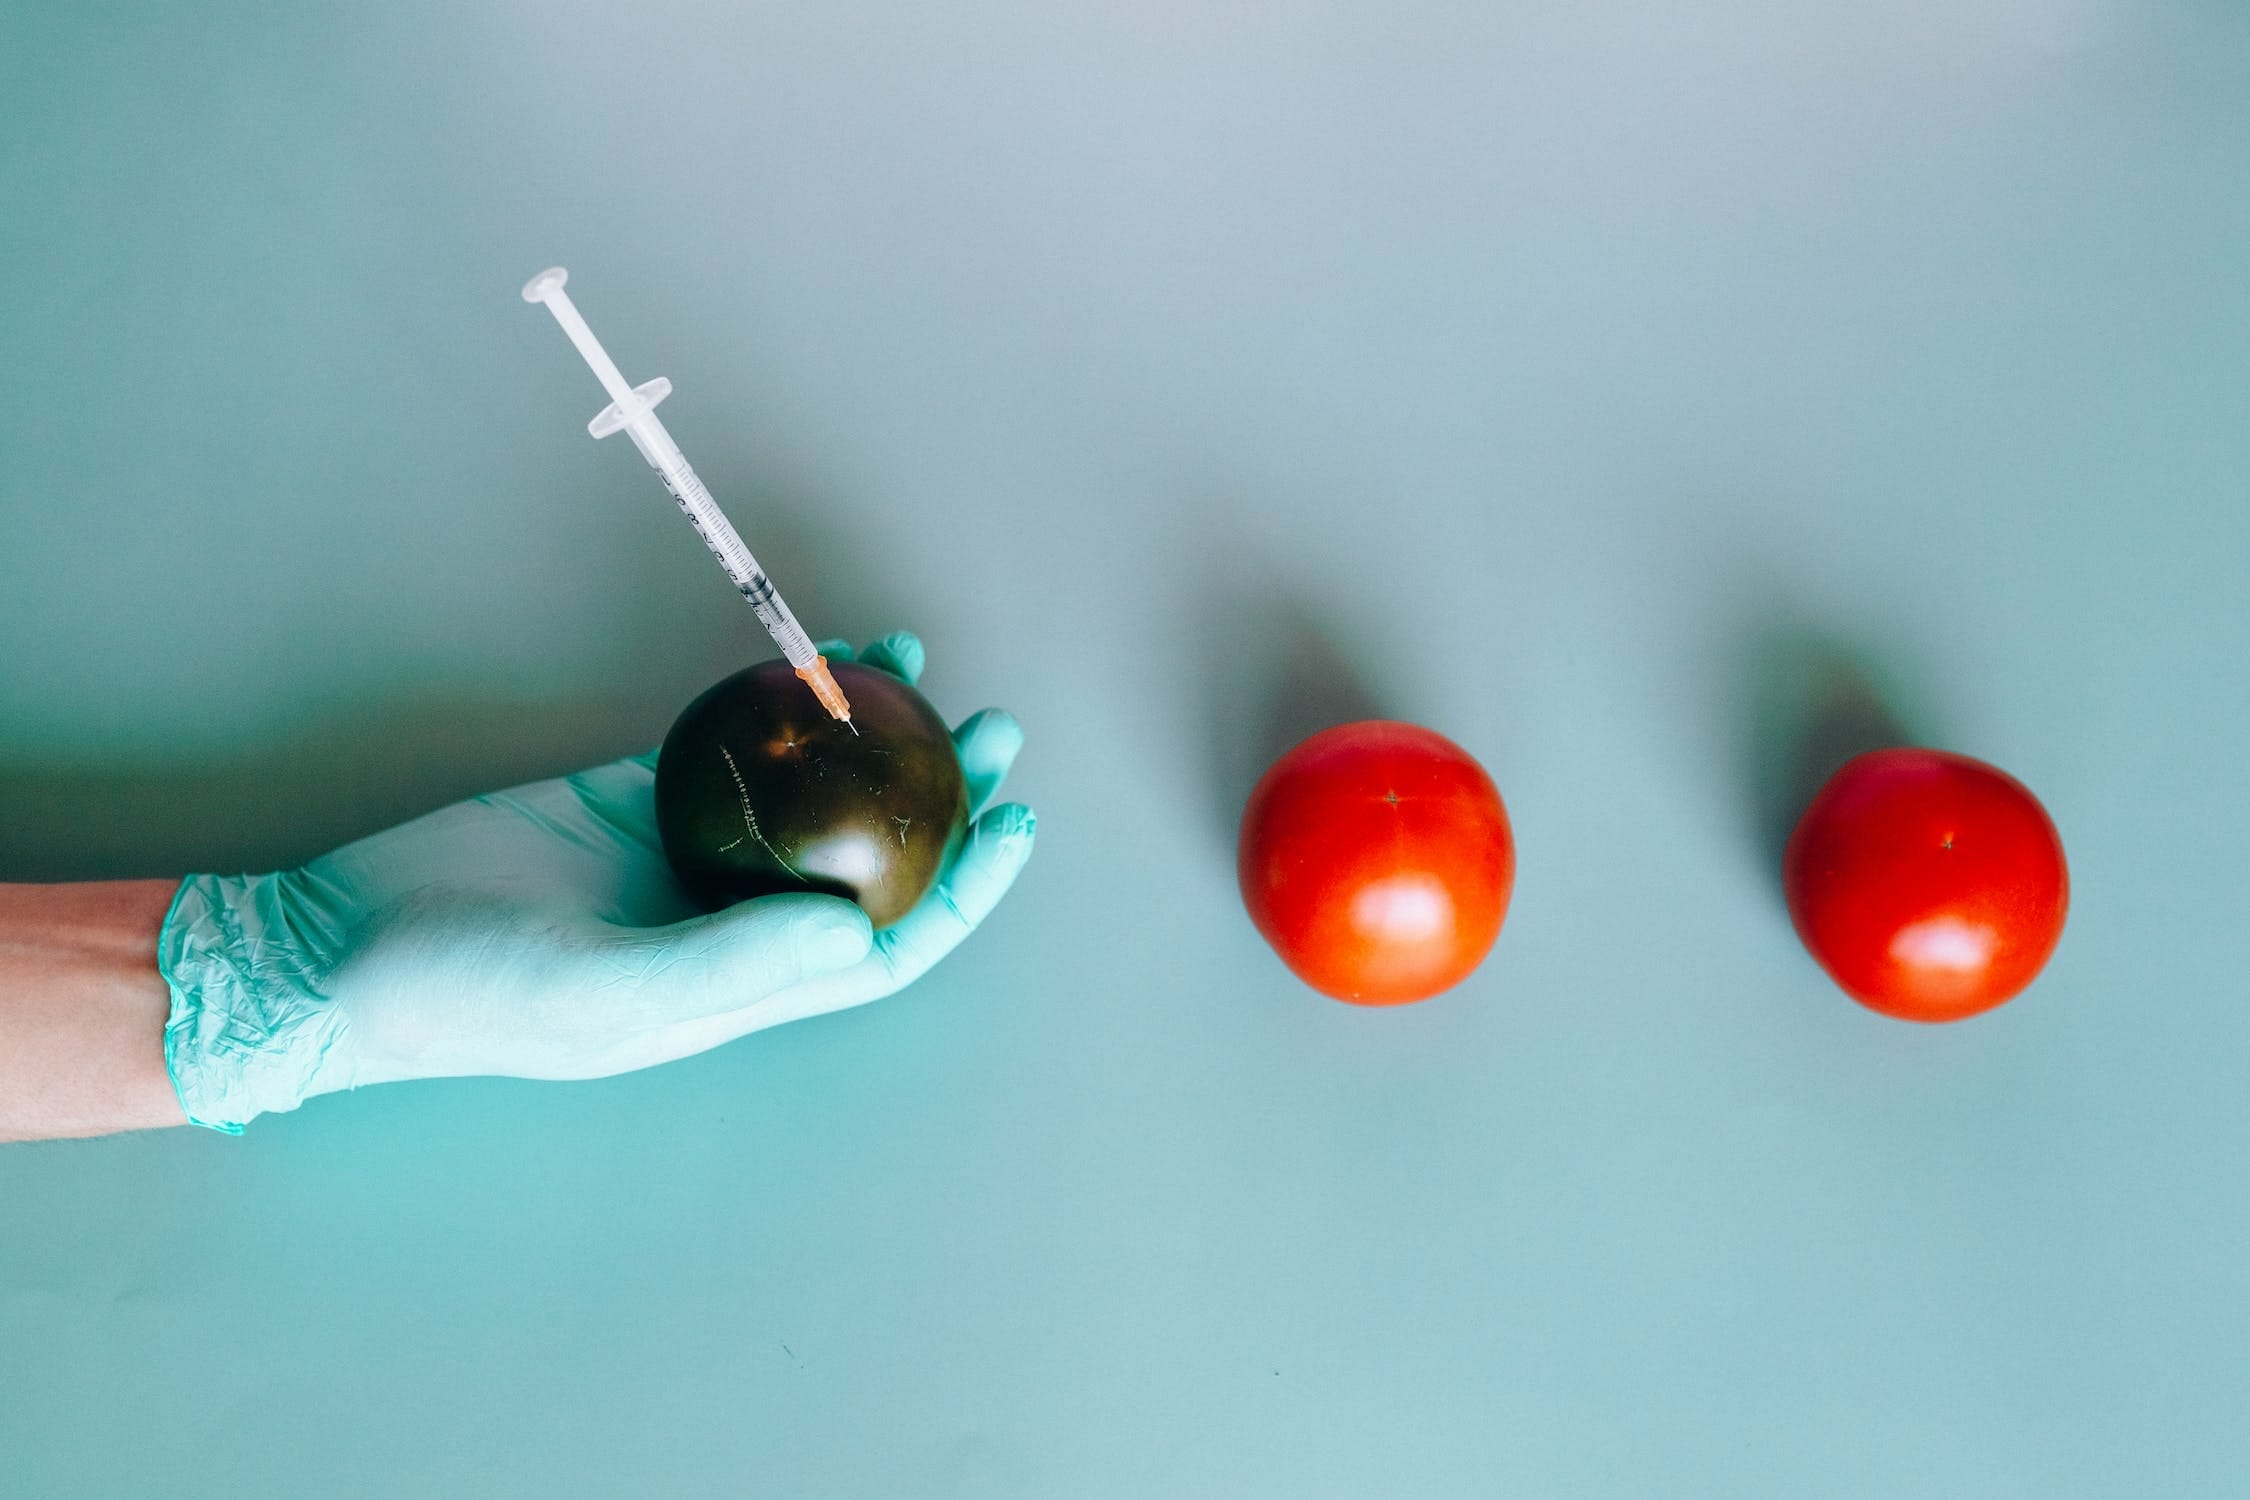 A person wearing medical gloves is holding a green tomato with a syringe injected into it.